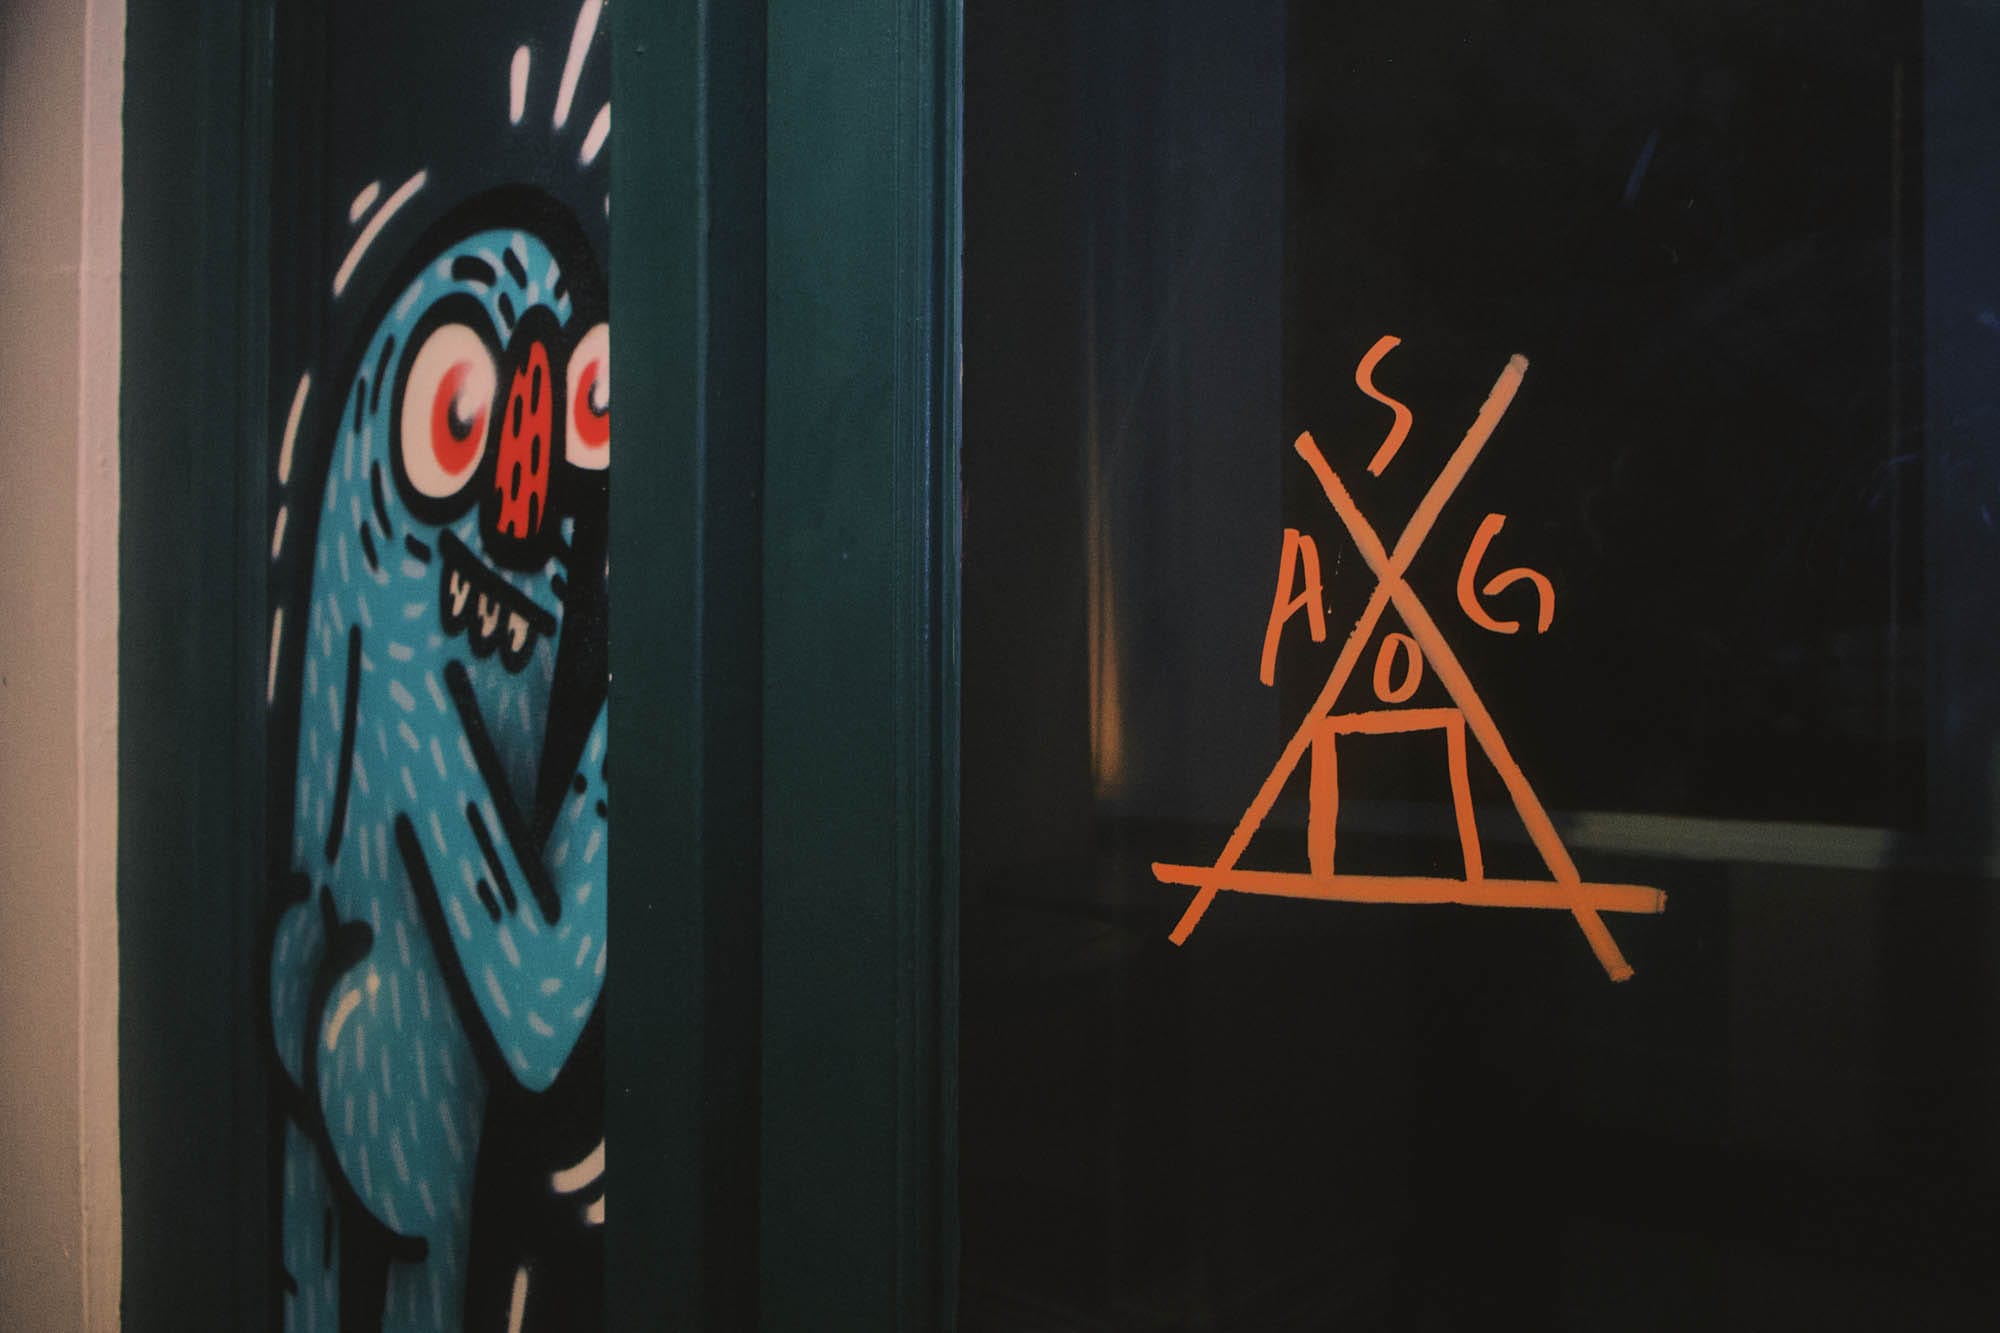 The entrance to Sago House with its hand-drawn logo. Photo: Supplied